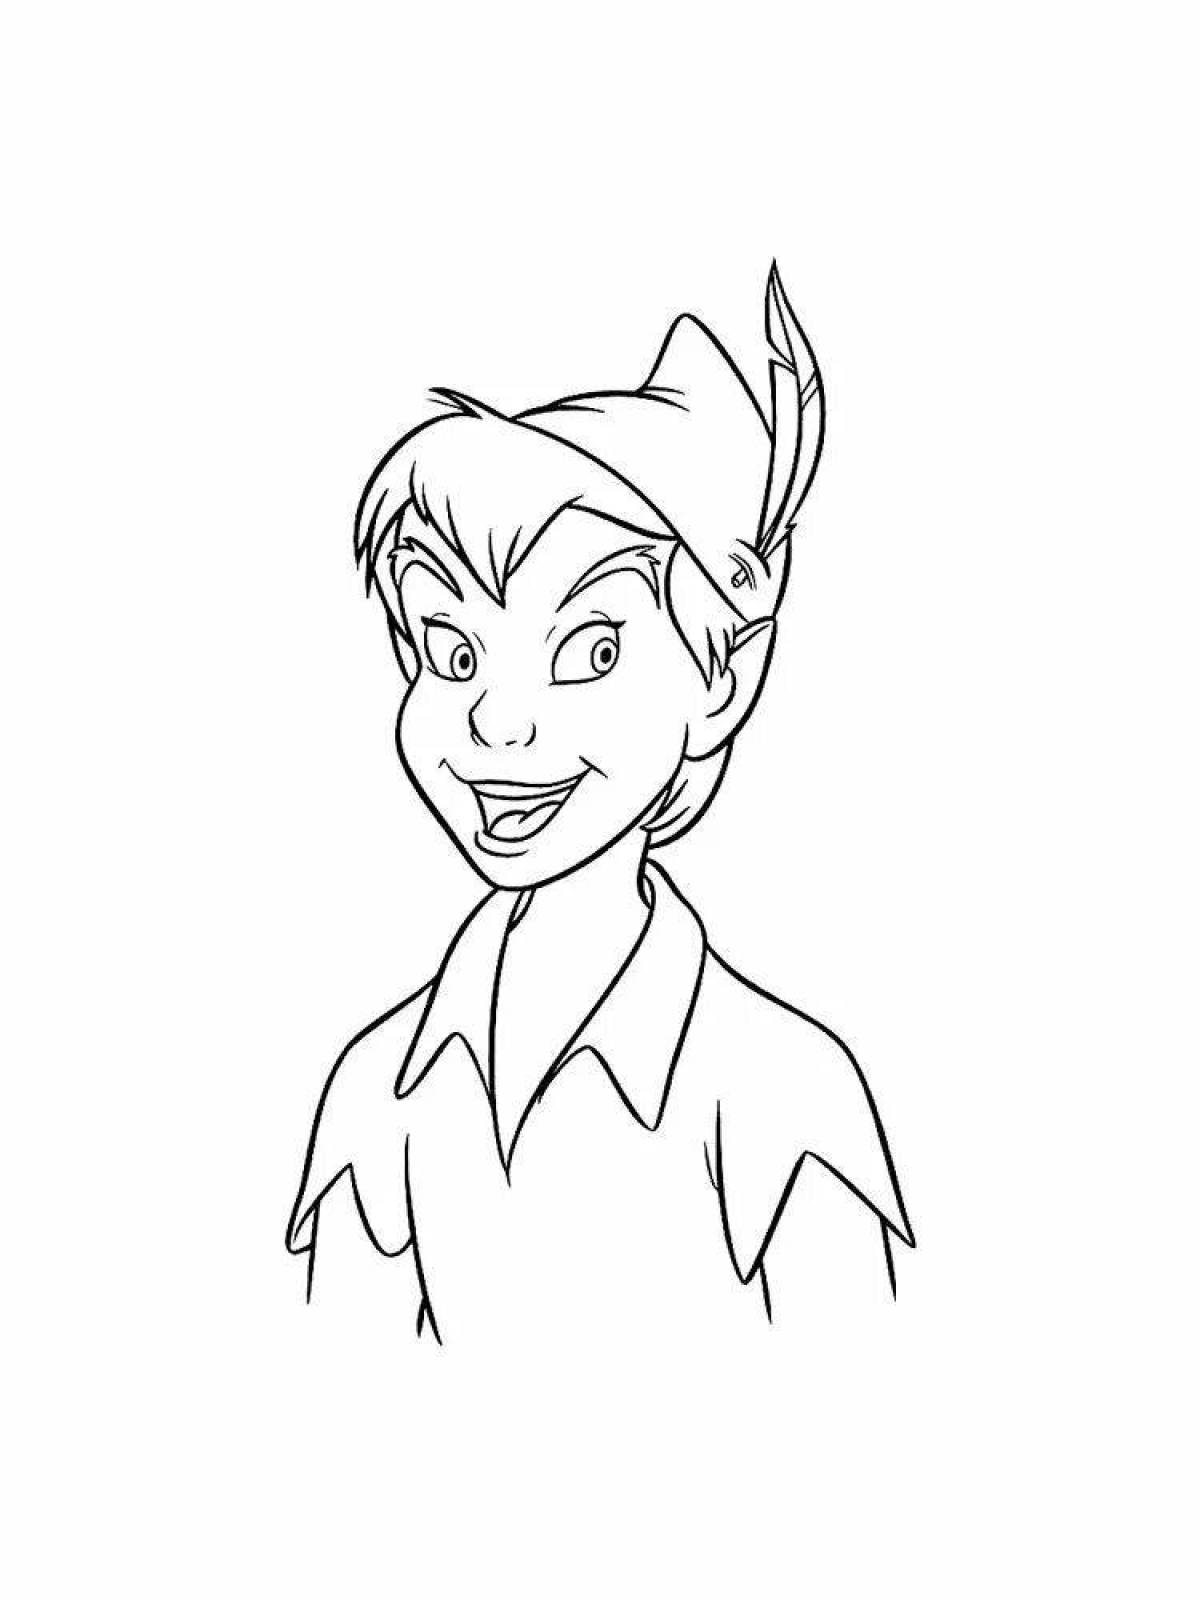 Colorful peter pan coloring page